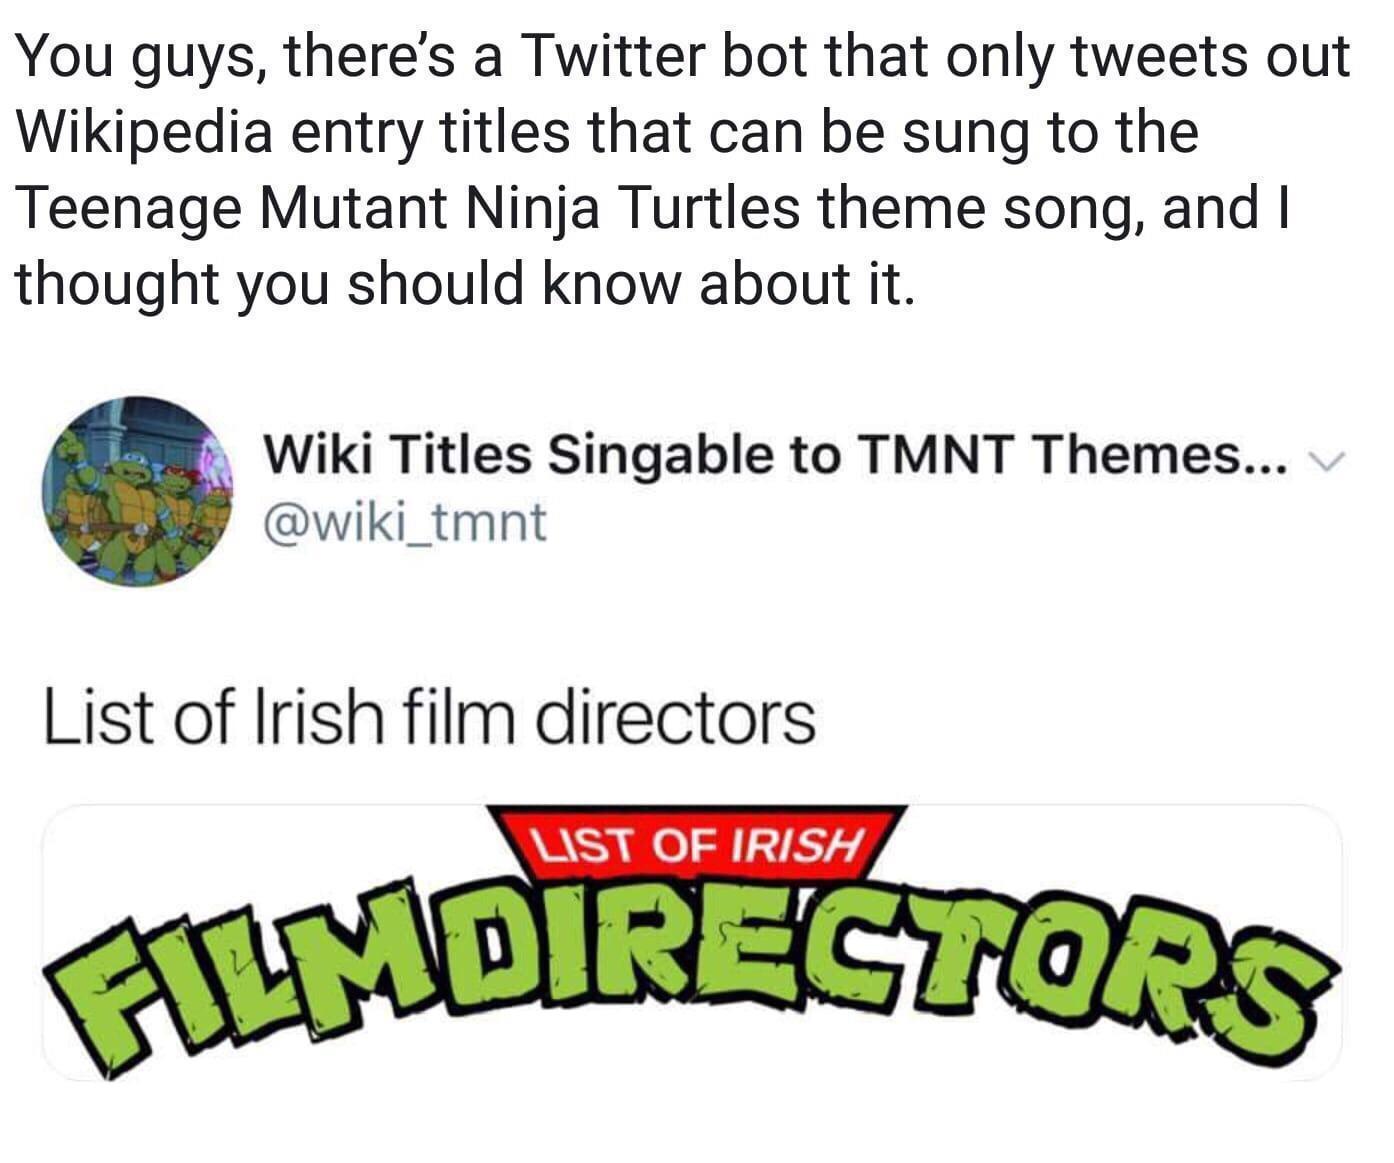 dank memes - point - You guys, there's a Twitter bot that only tweets out Wikipedia entry titles that can be sung to the Teenage Mutant Ninja Turtles theme song, and I thought you should know about it. Wiki Titles Singable to Tmnt Themes... List of Irish 